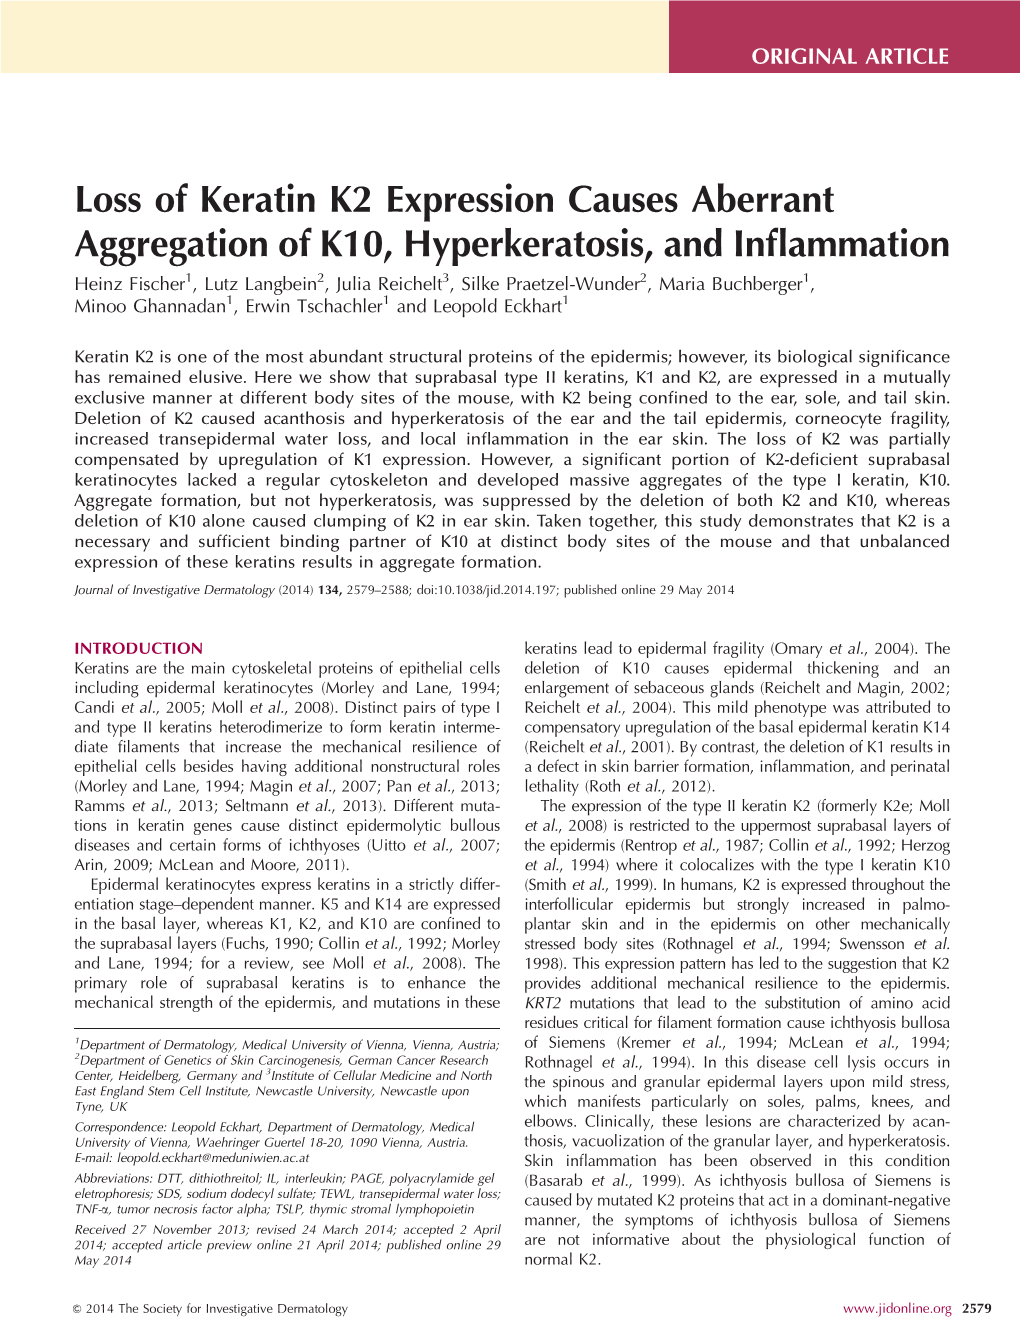 Loss of Keratin K2 Expression Causes Aberrant Aggregation of K10, Hyperkeratosis, and Inflammation